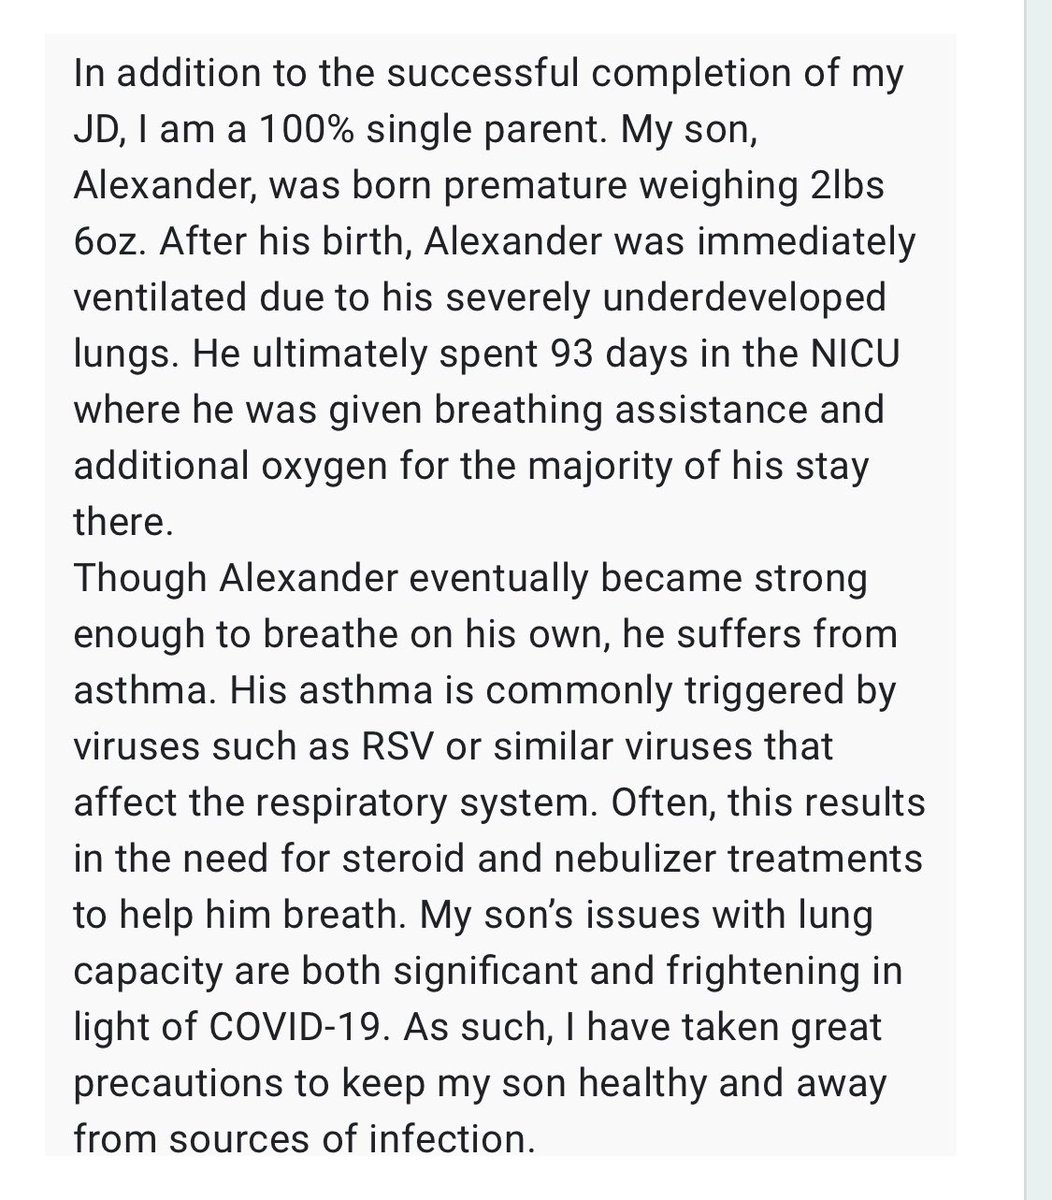 This applicant is a single parent to a child with a pre-existing condition. He/she states that we simply do not know the long term effects of this virus, and what will happen if their child becomes ill. 14/